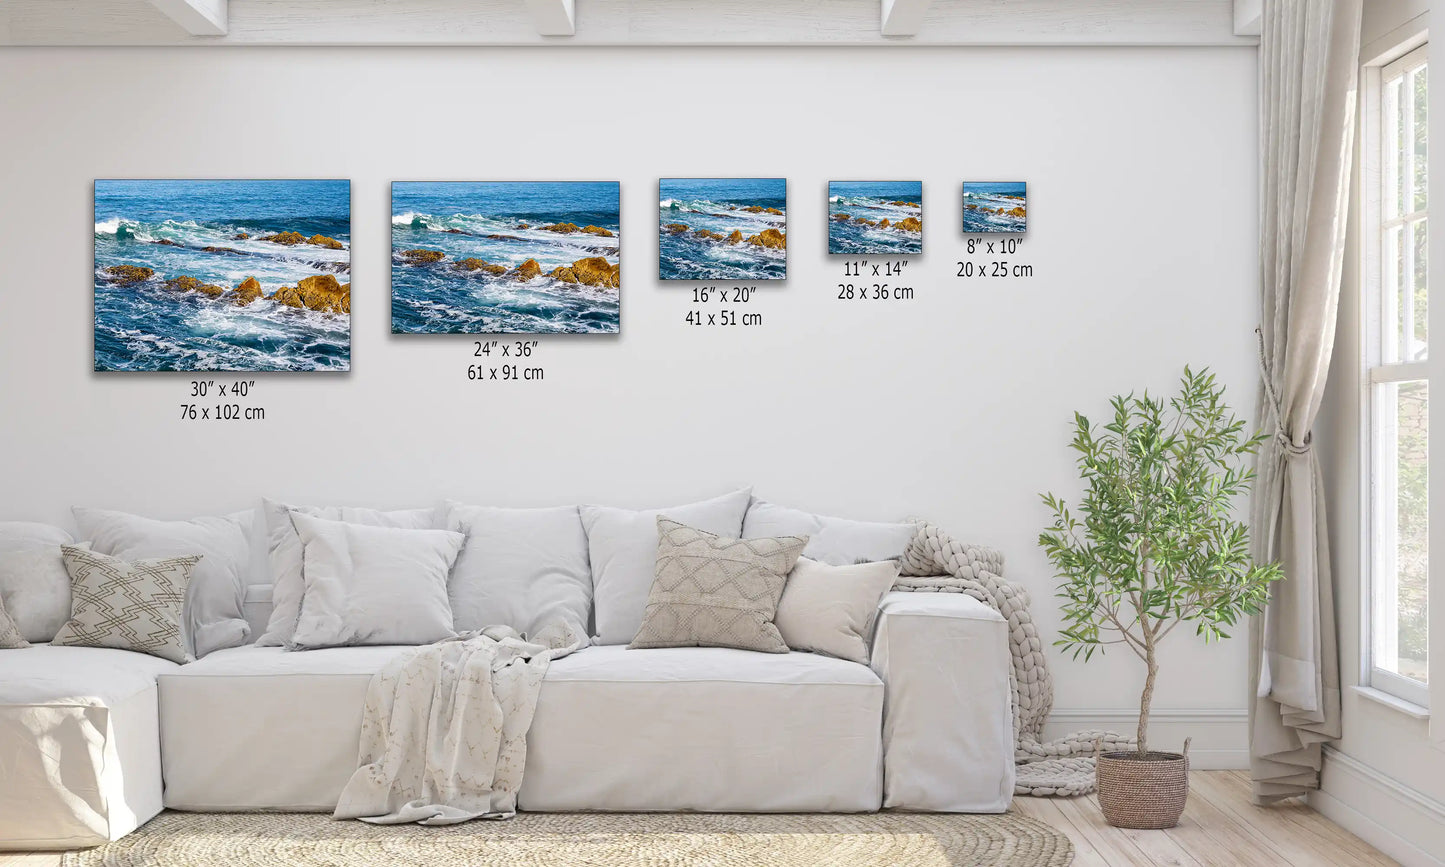 Size comparison diagram showing the ocean scene canvas in various sizes displayed over a couch.